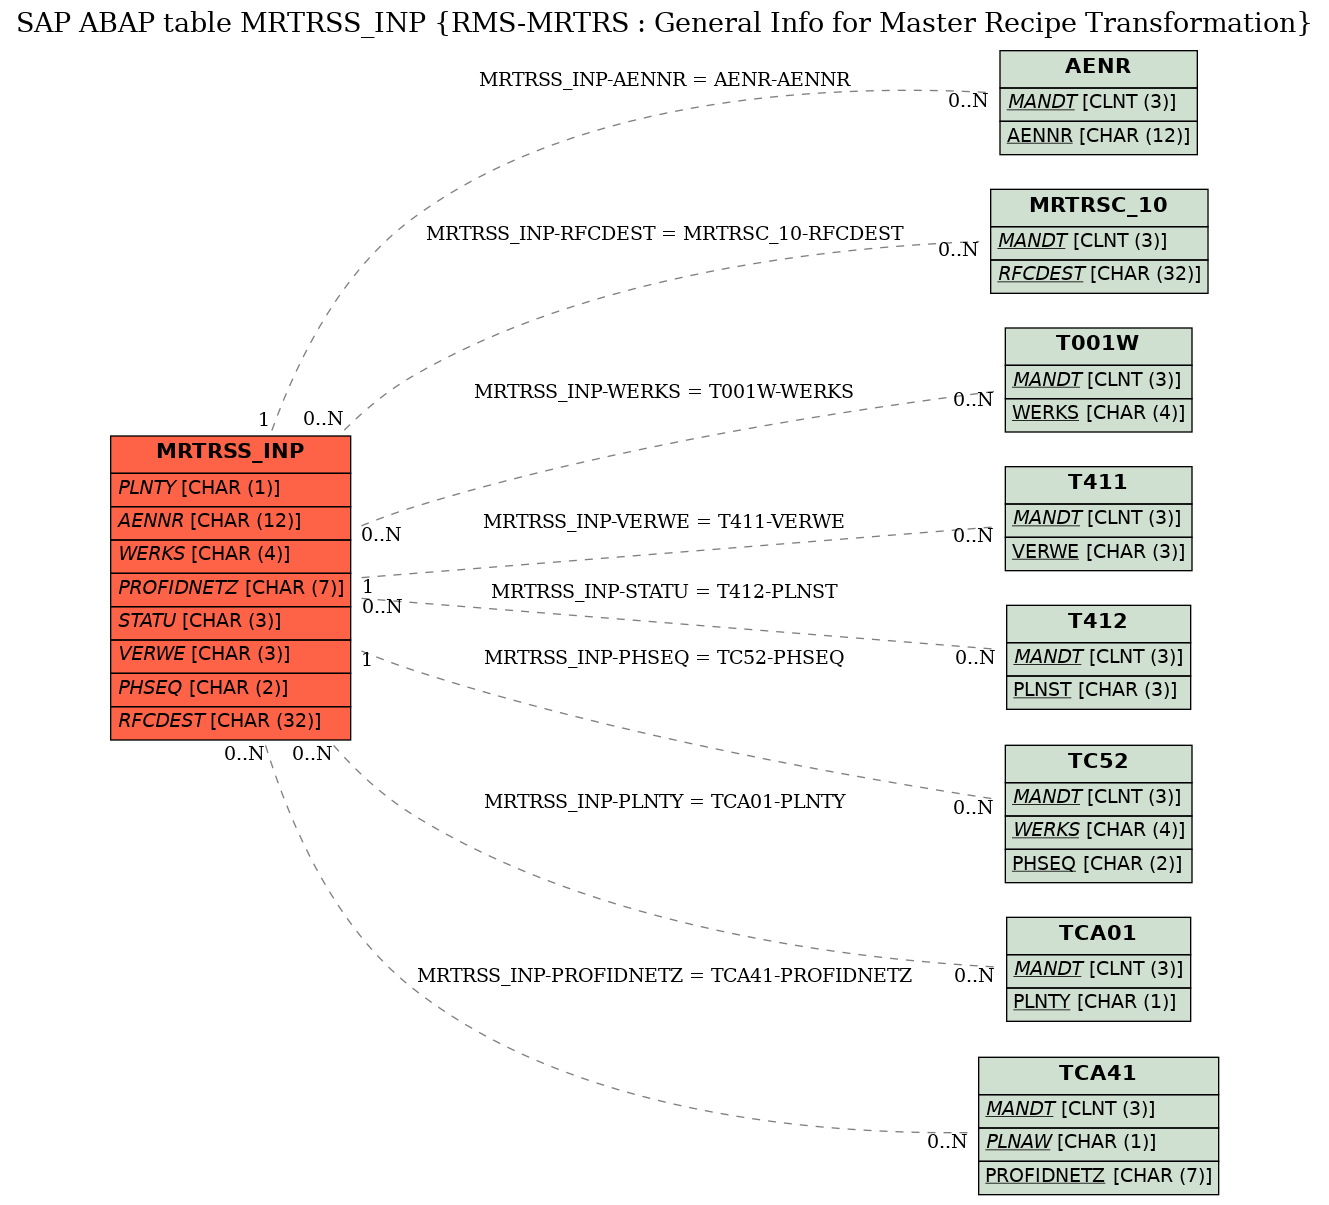 E-R Diagram for table MRTRSS_INP (RMS-MRTRS : General Info for Master Recipe Transformation)